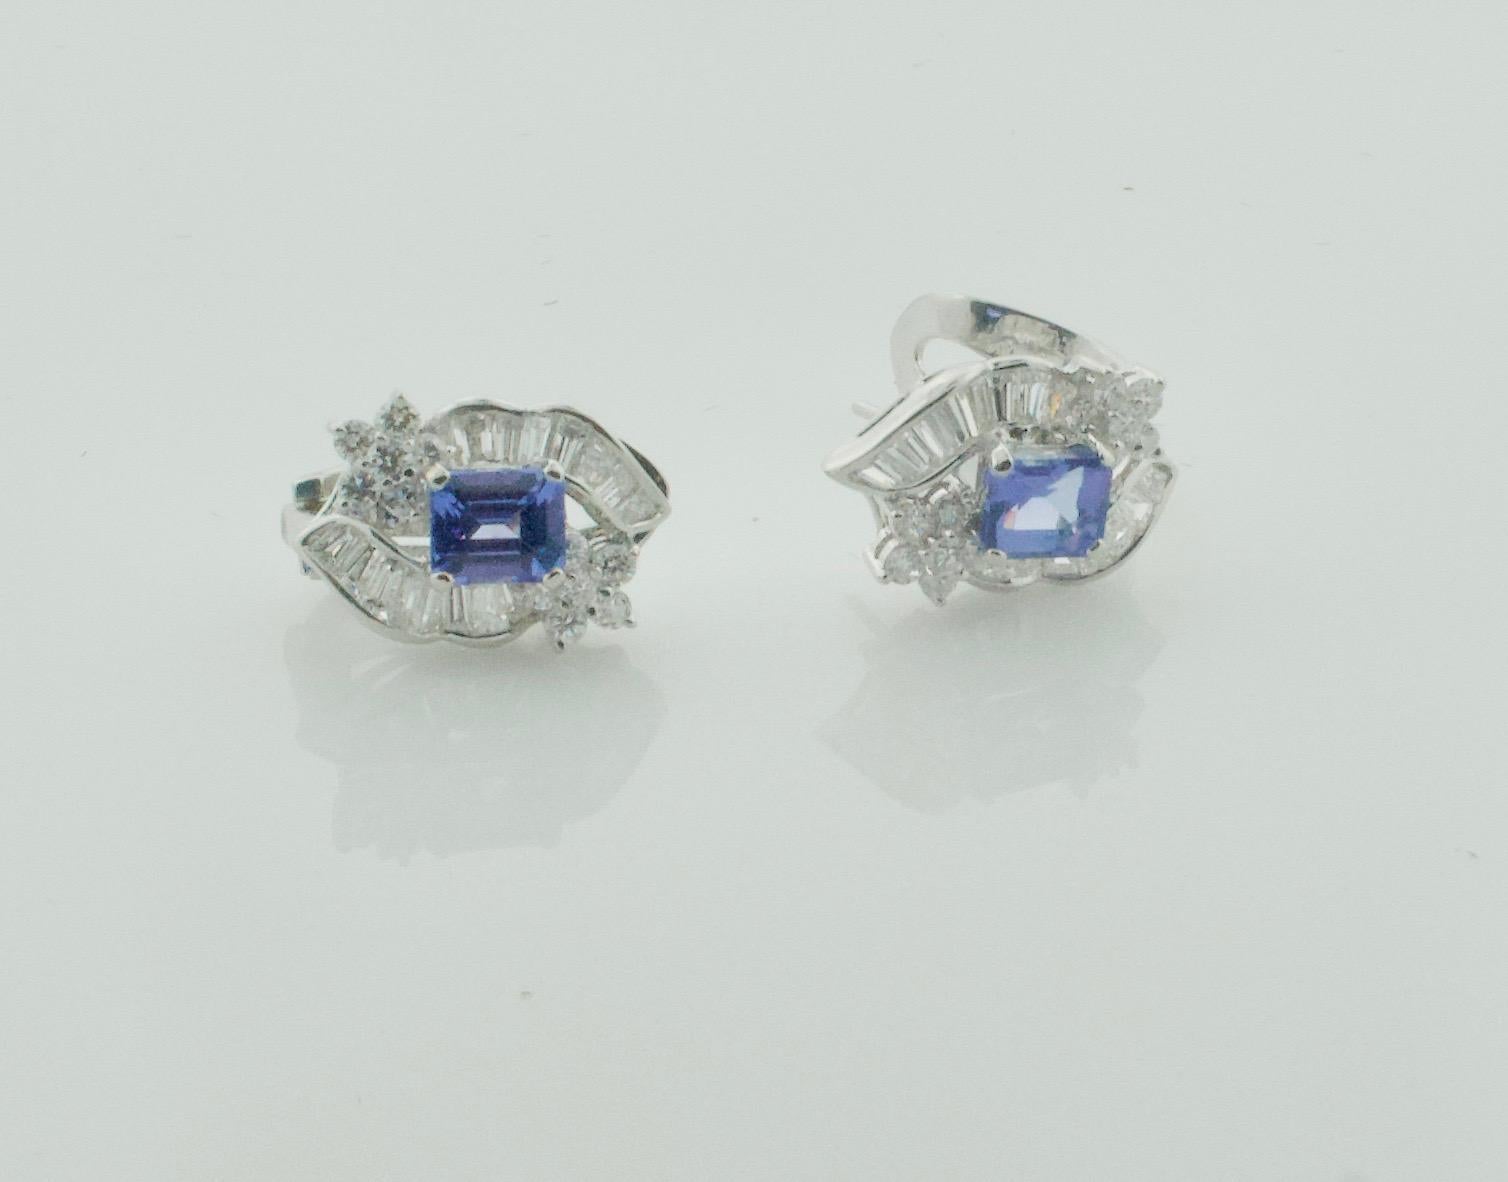 Classy Tanzanite and Diamond Earrings in 18k White Gold
2 Emerald Cut Tanzanites Weighing 1.90 Carats Approximately [bright with no imperfections visible to the naked eye]
32 Tapered Baguette Cut Diamonds Weighing 1.00 Carats Approximately 
24 Round